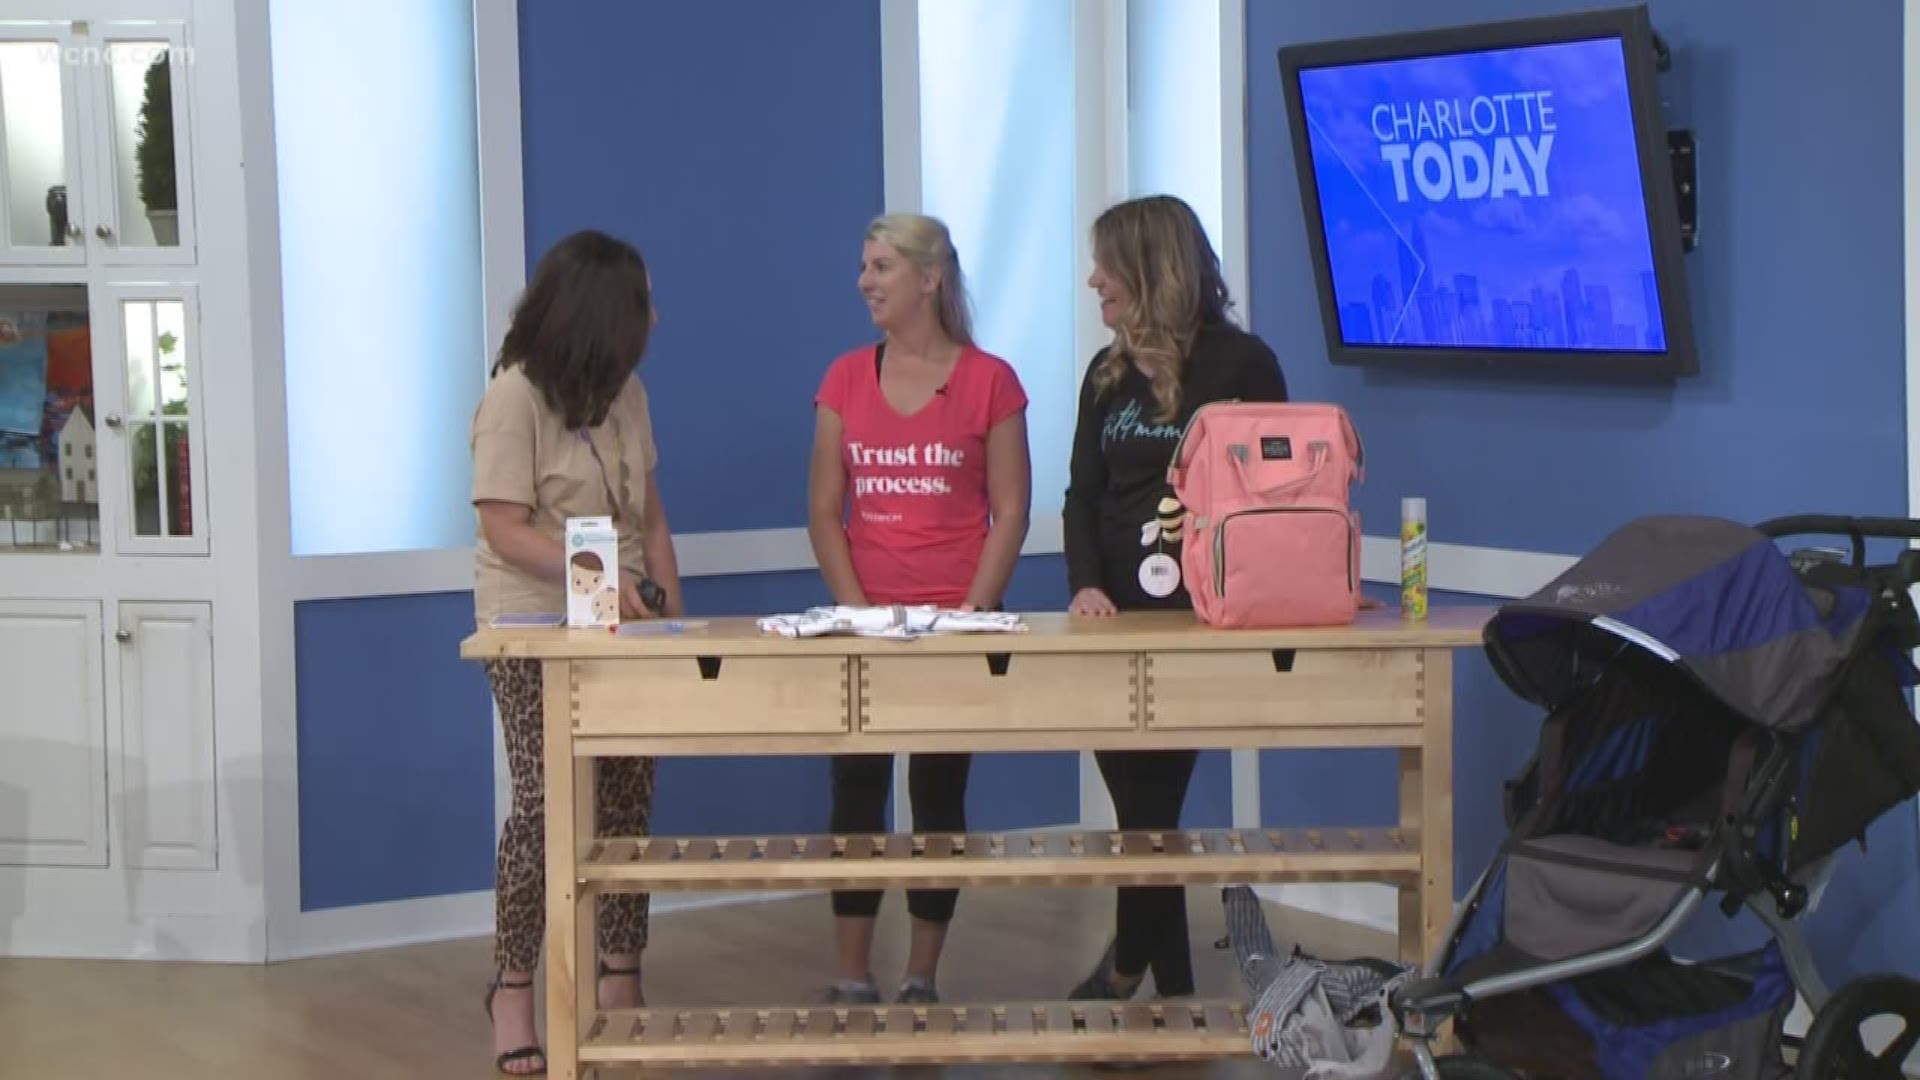 The ladies of Fit4Mom Lake Norman share their favorite parenting products they think all new moms should have.